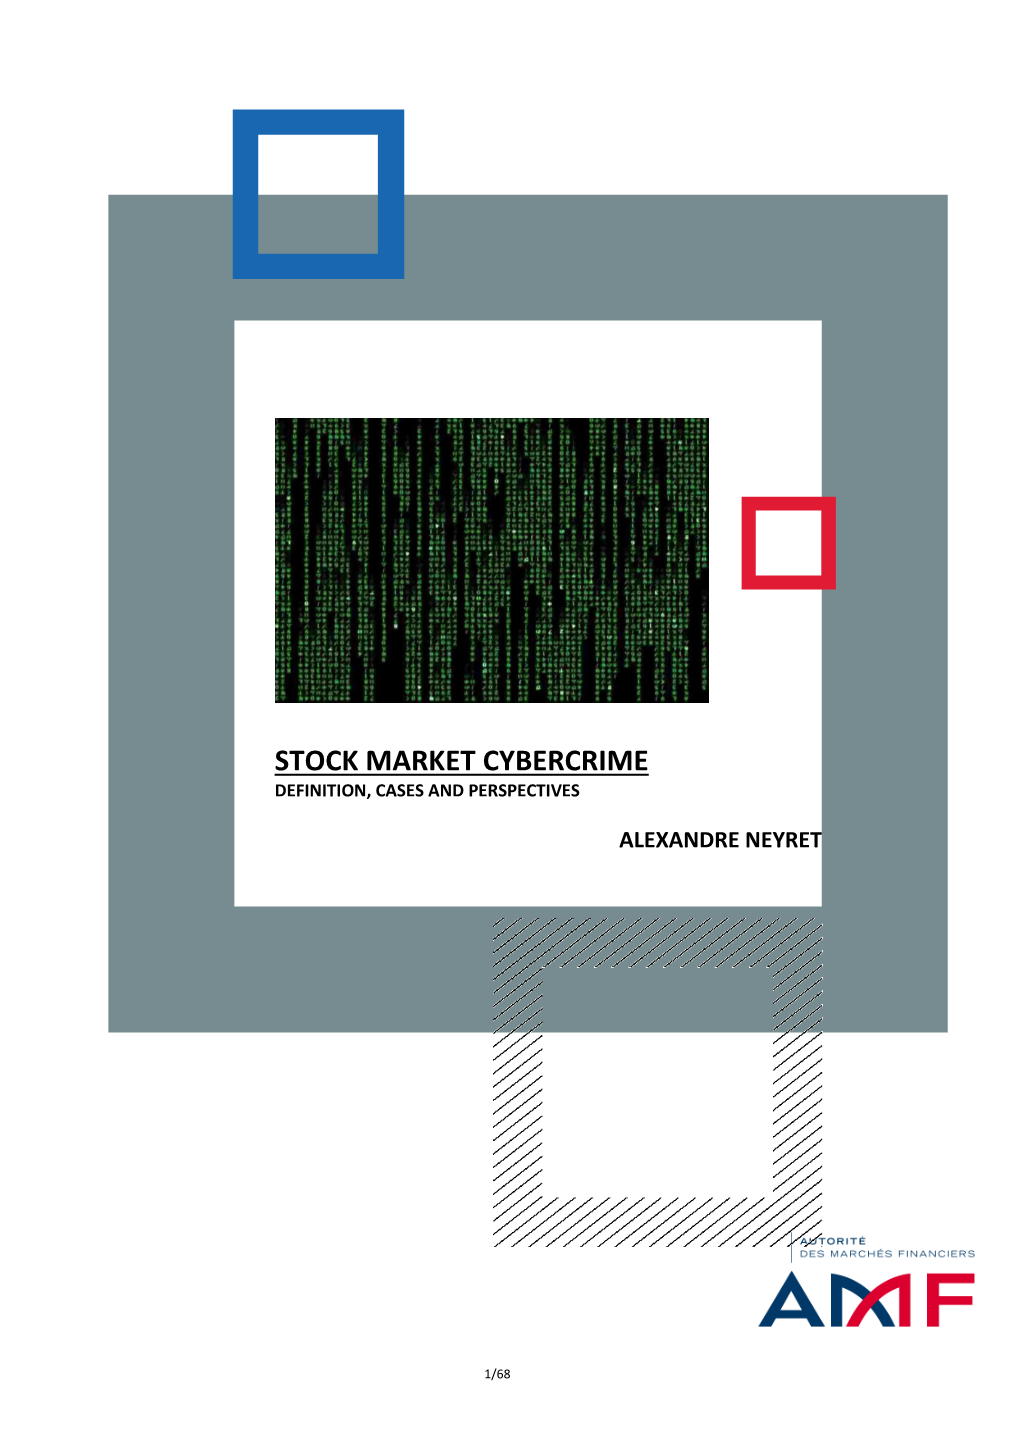 Stock Market Cybercrime Definition, Cases and Perspectives